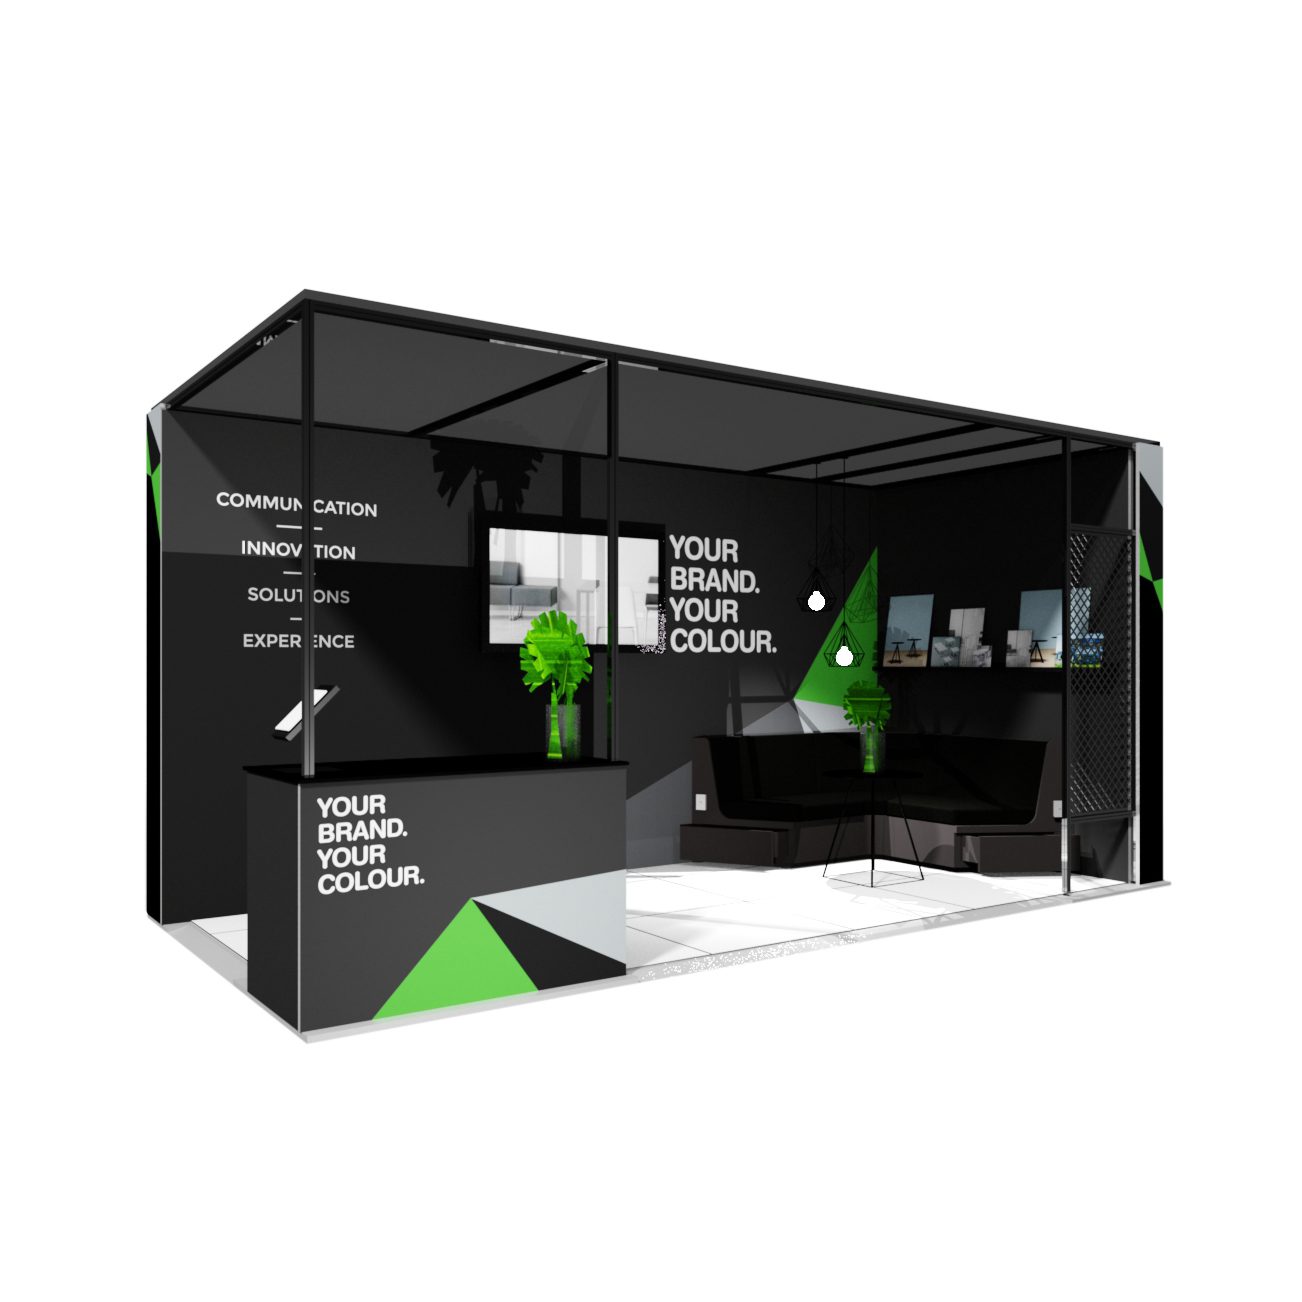 The Lounge 6m x 3m Exhibition Stand